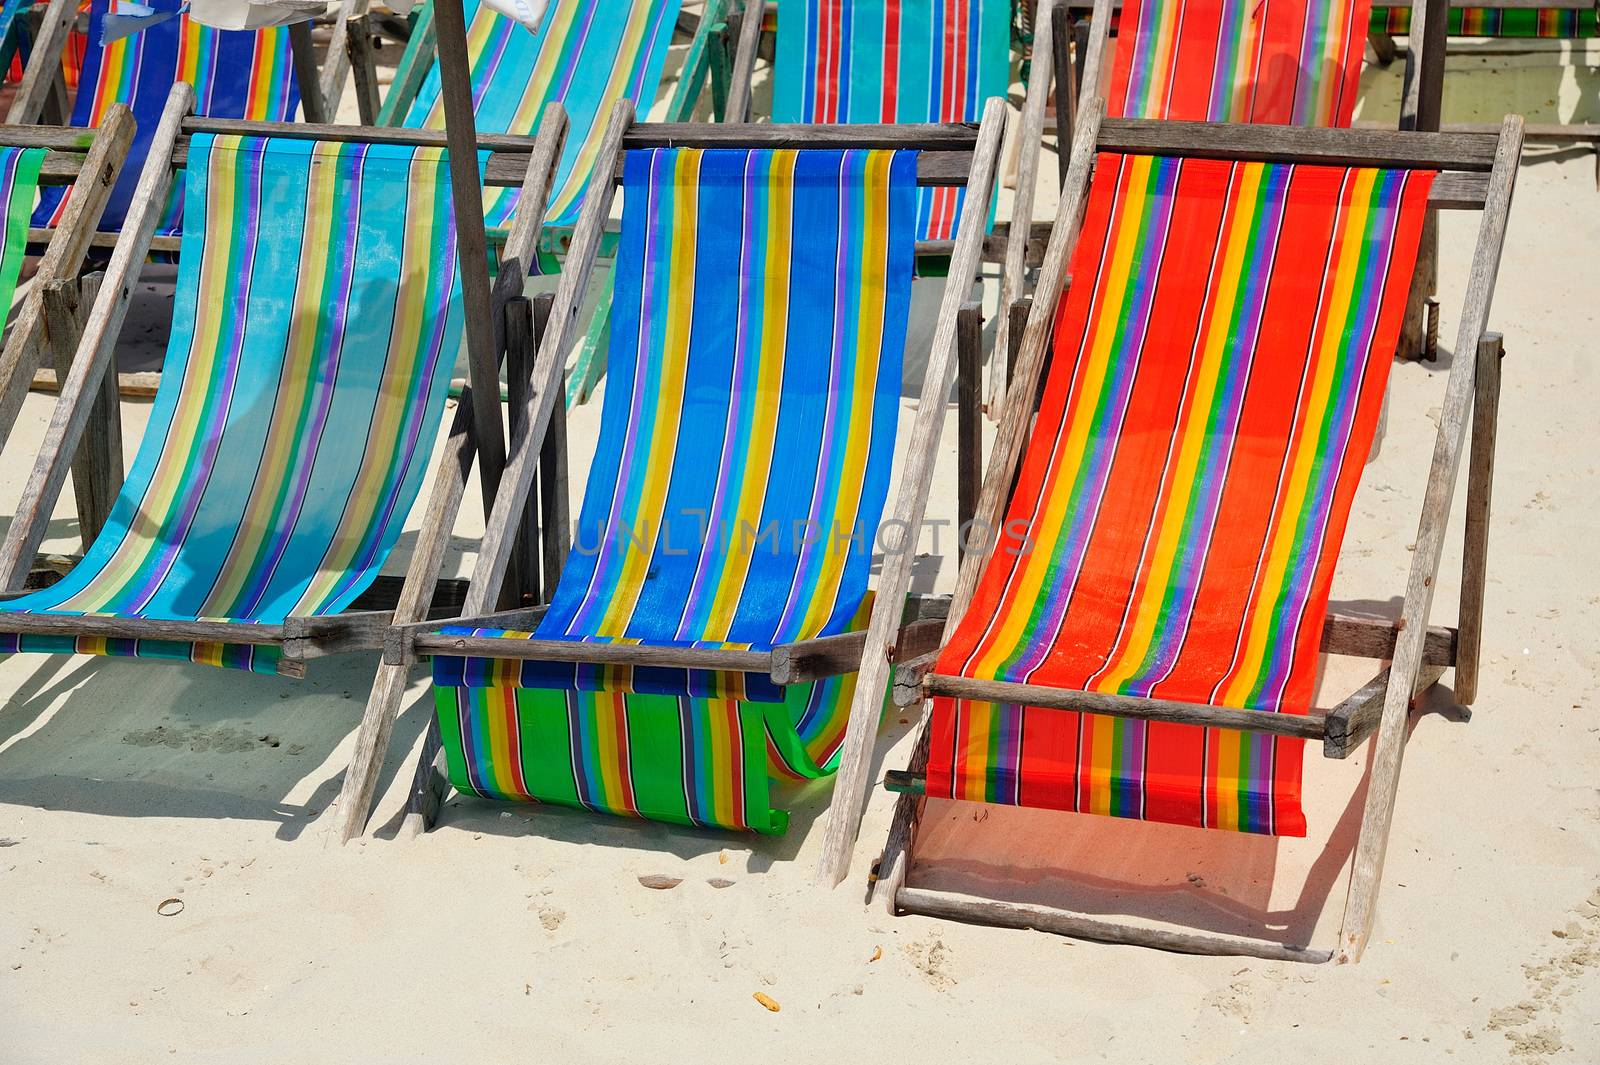 colorful of Deck Chairs on the Beach in Sunny Day ,Pattaya Thail by think4photop